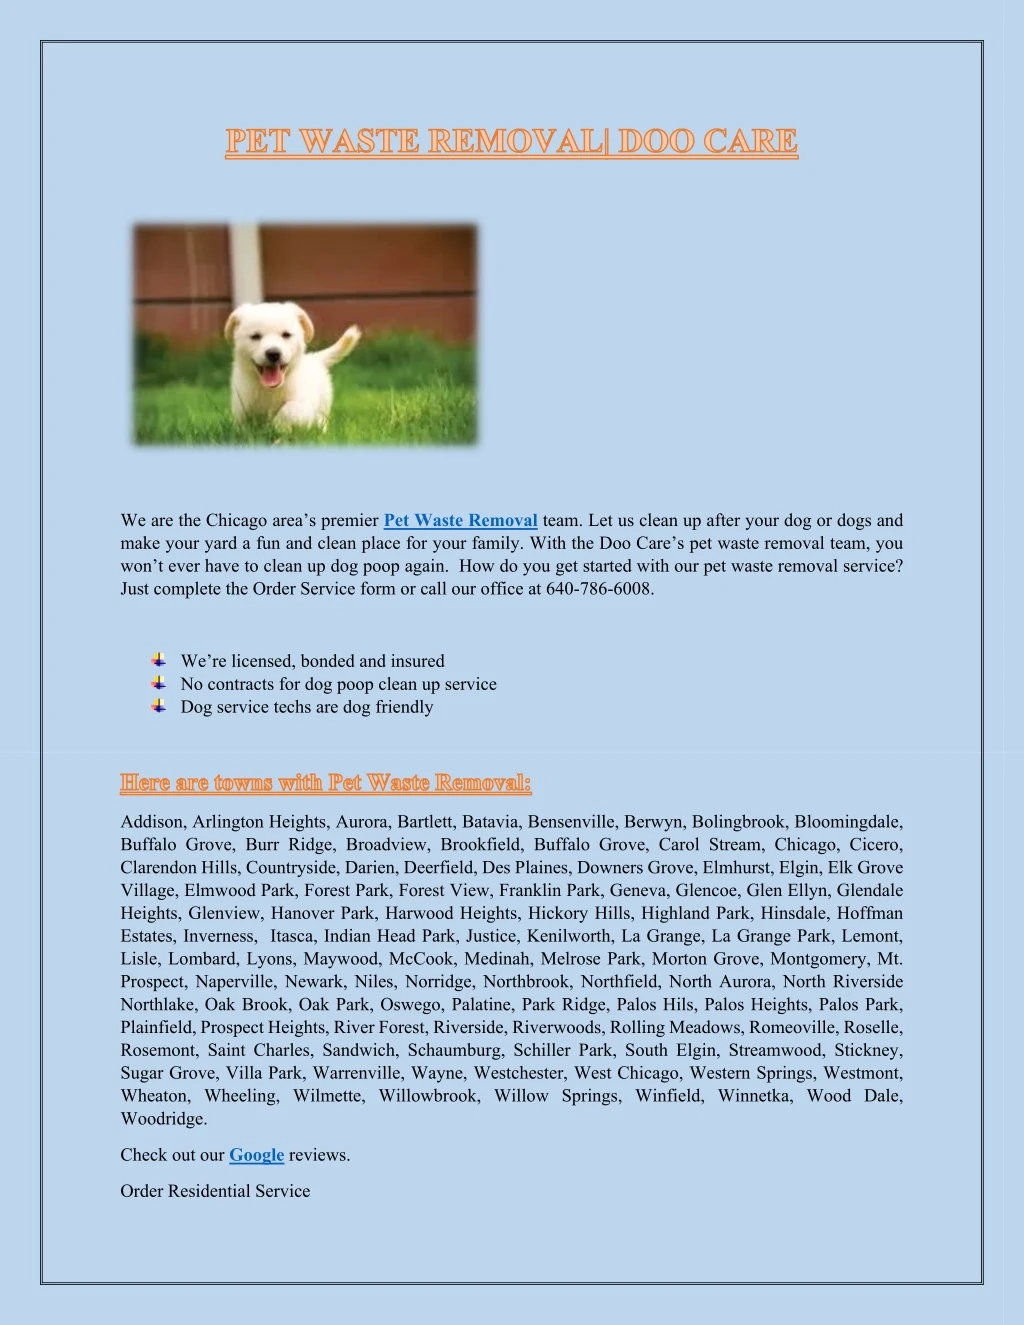 pet waste removal doo care